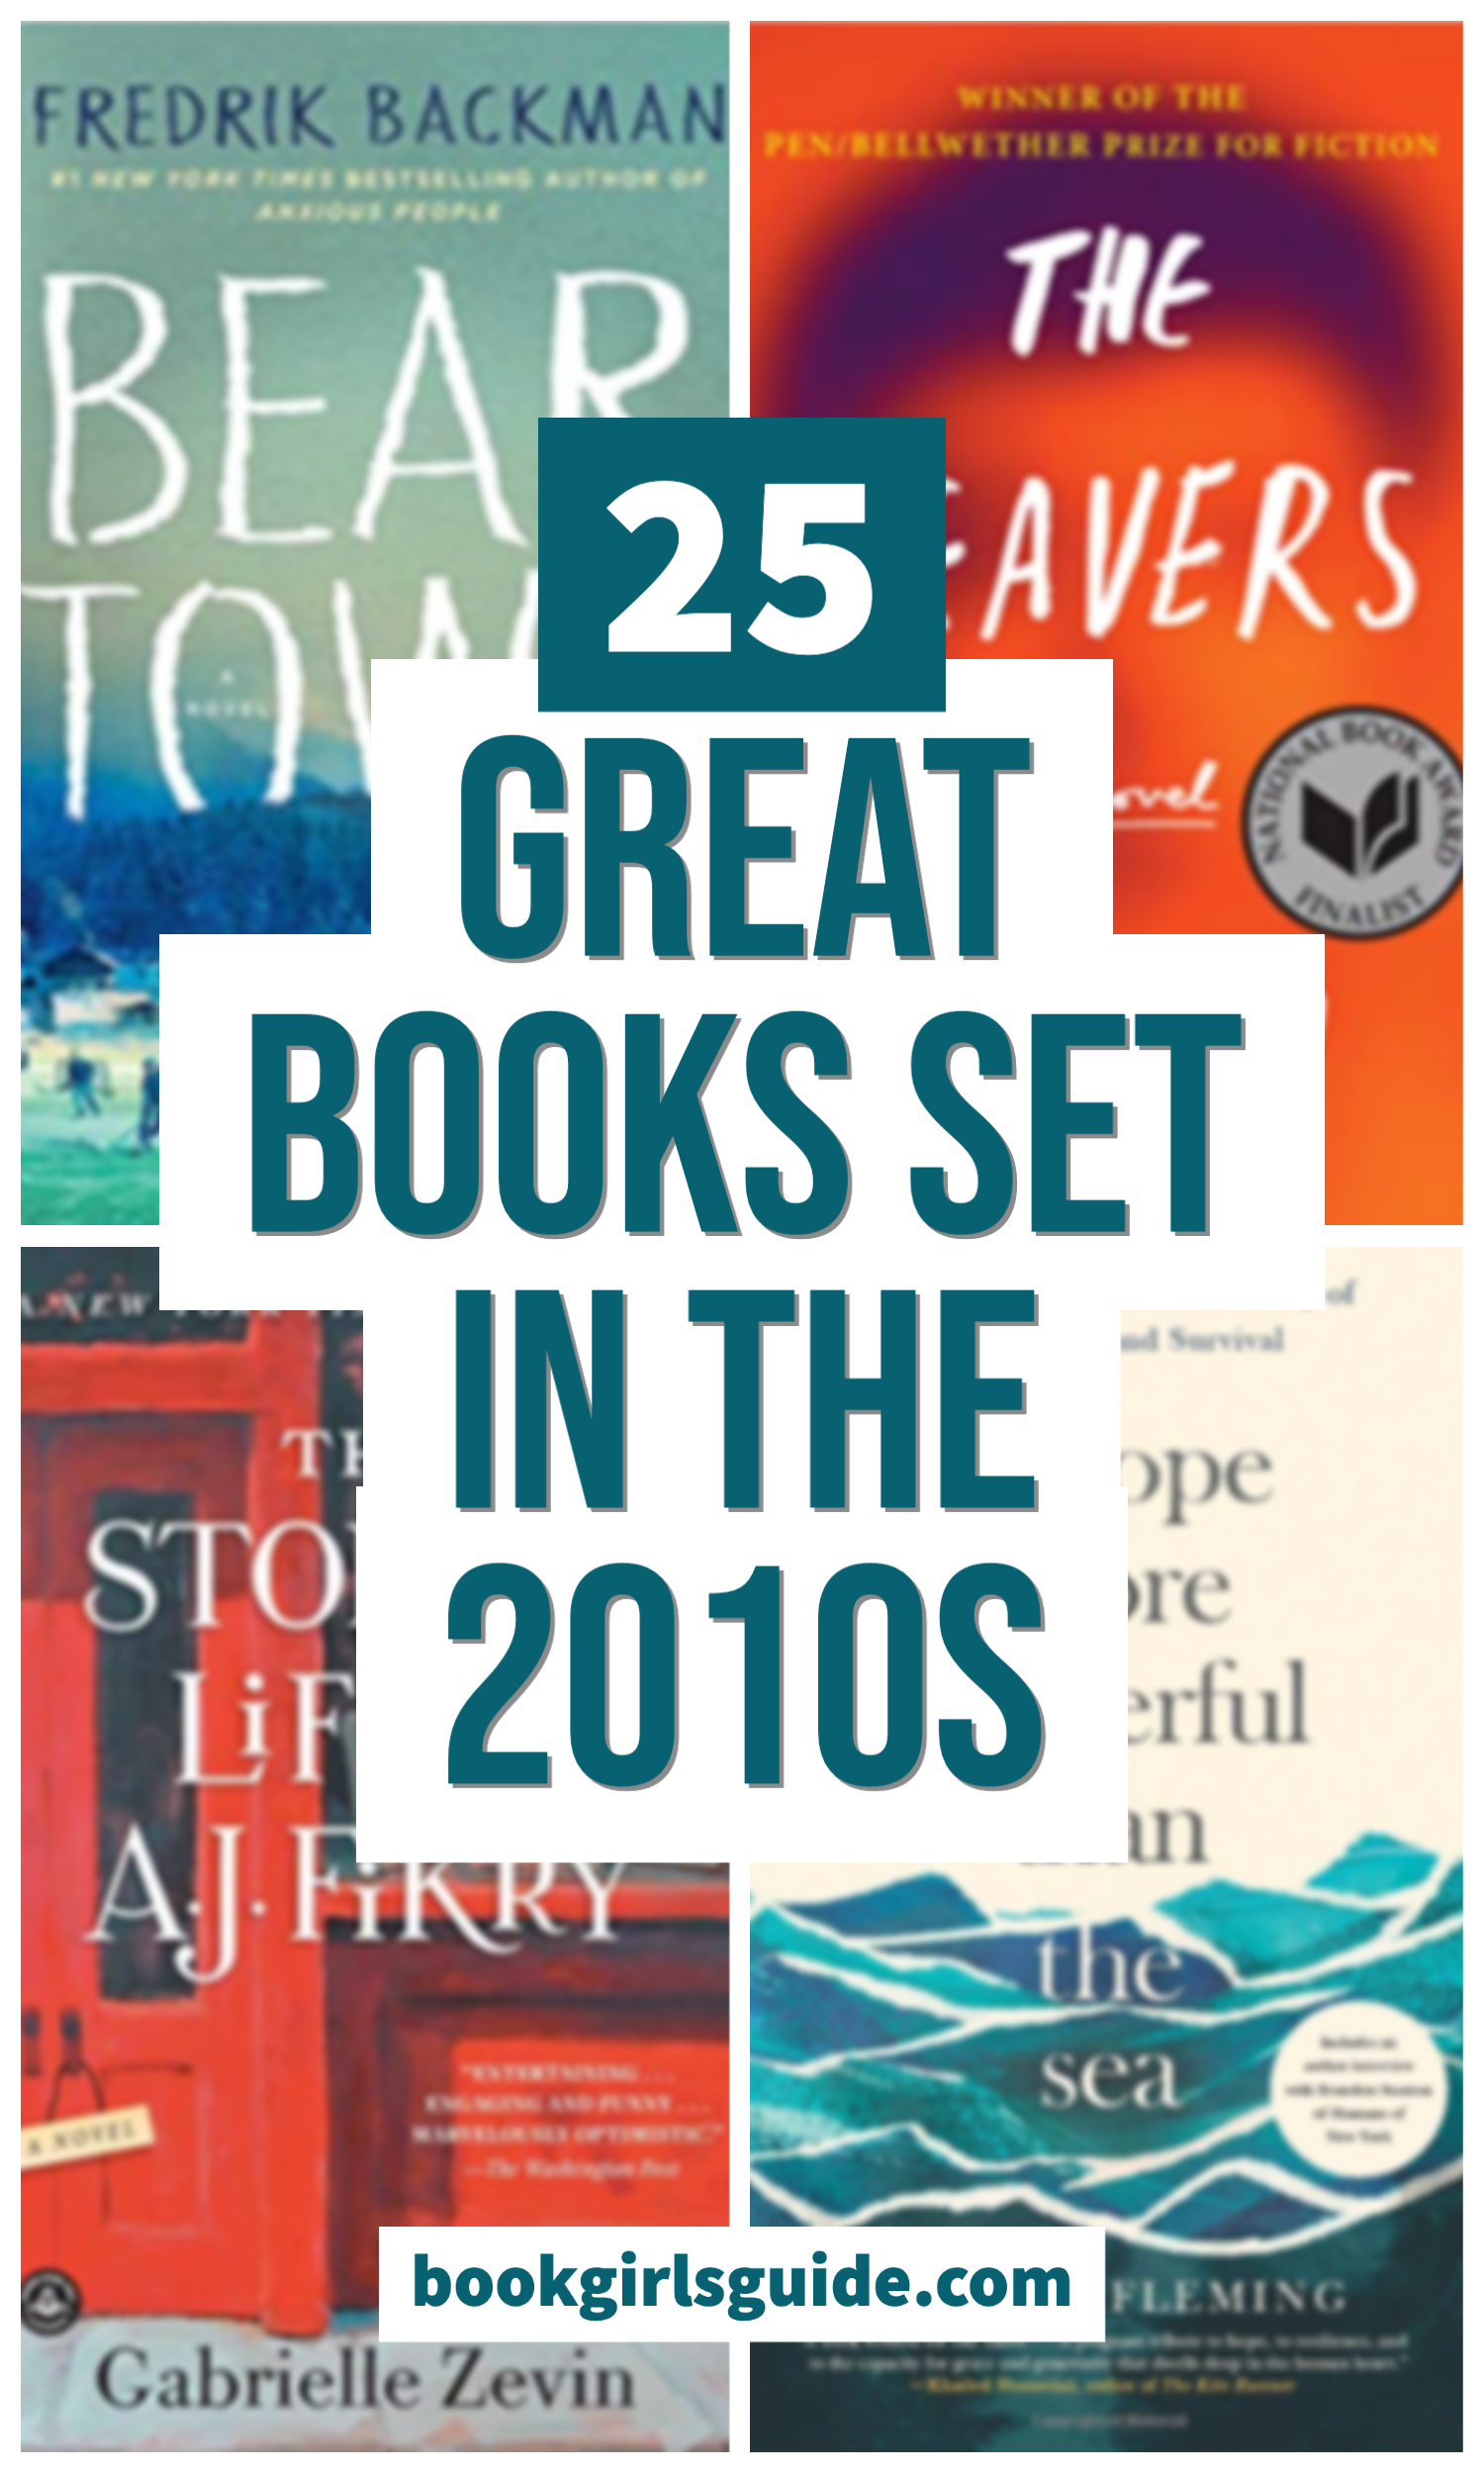 Text reading 25 Great Books Set in the 2010s over 4 green or red book covers